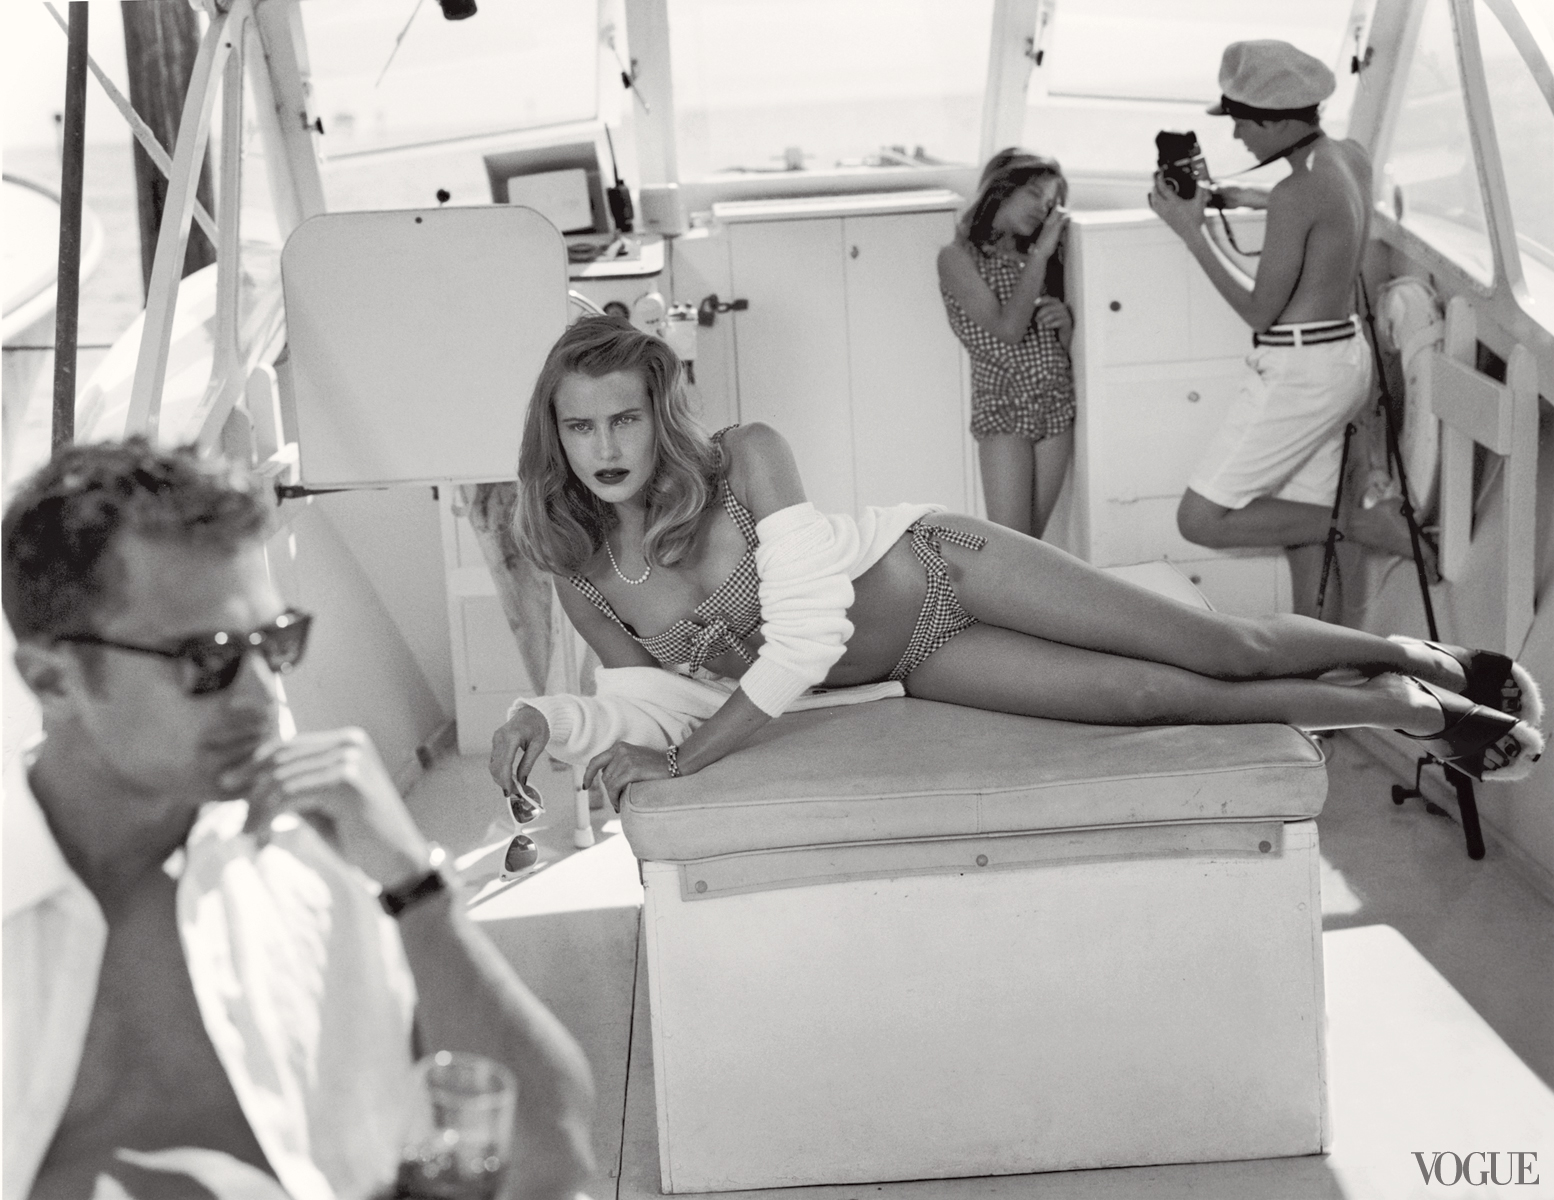 in-our-time-dree-hemingway-reimagines-the-life-of-her-grandfather-ernest-hemingway